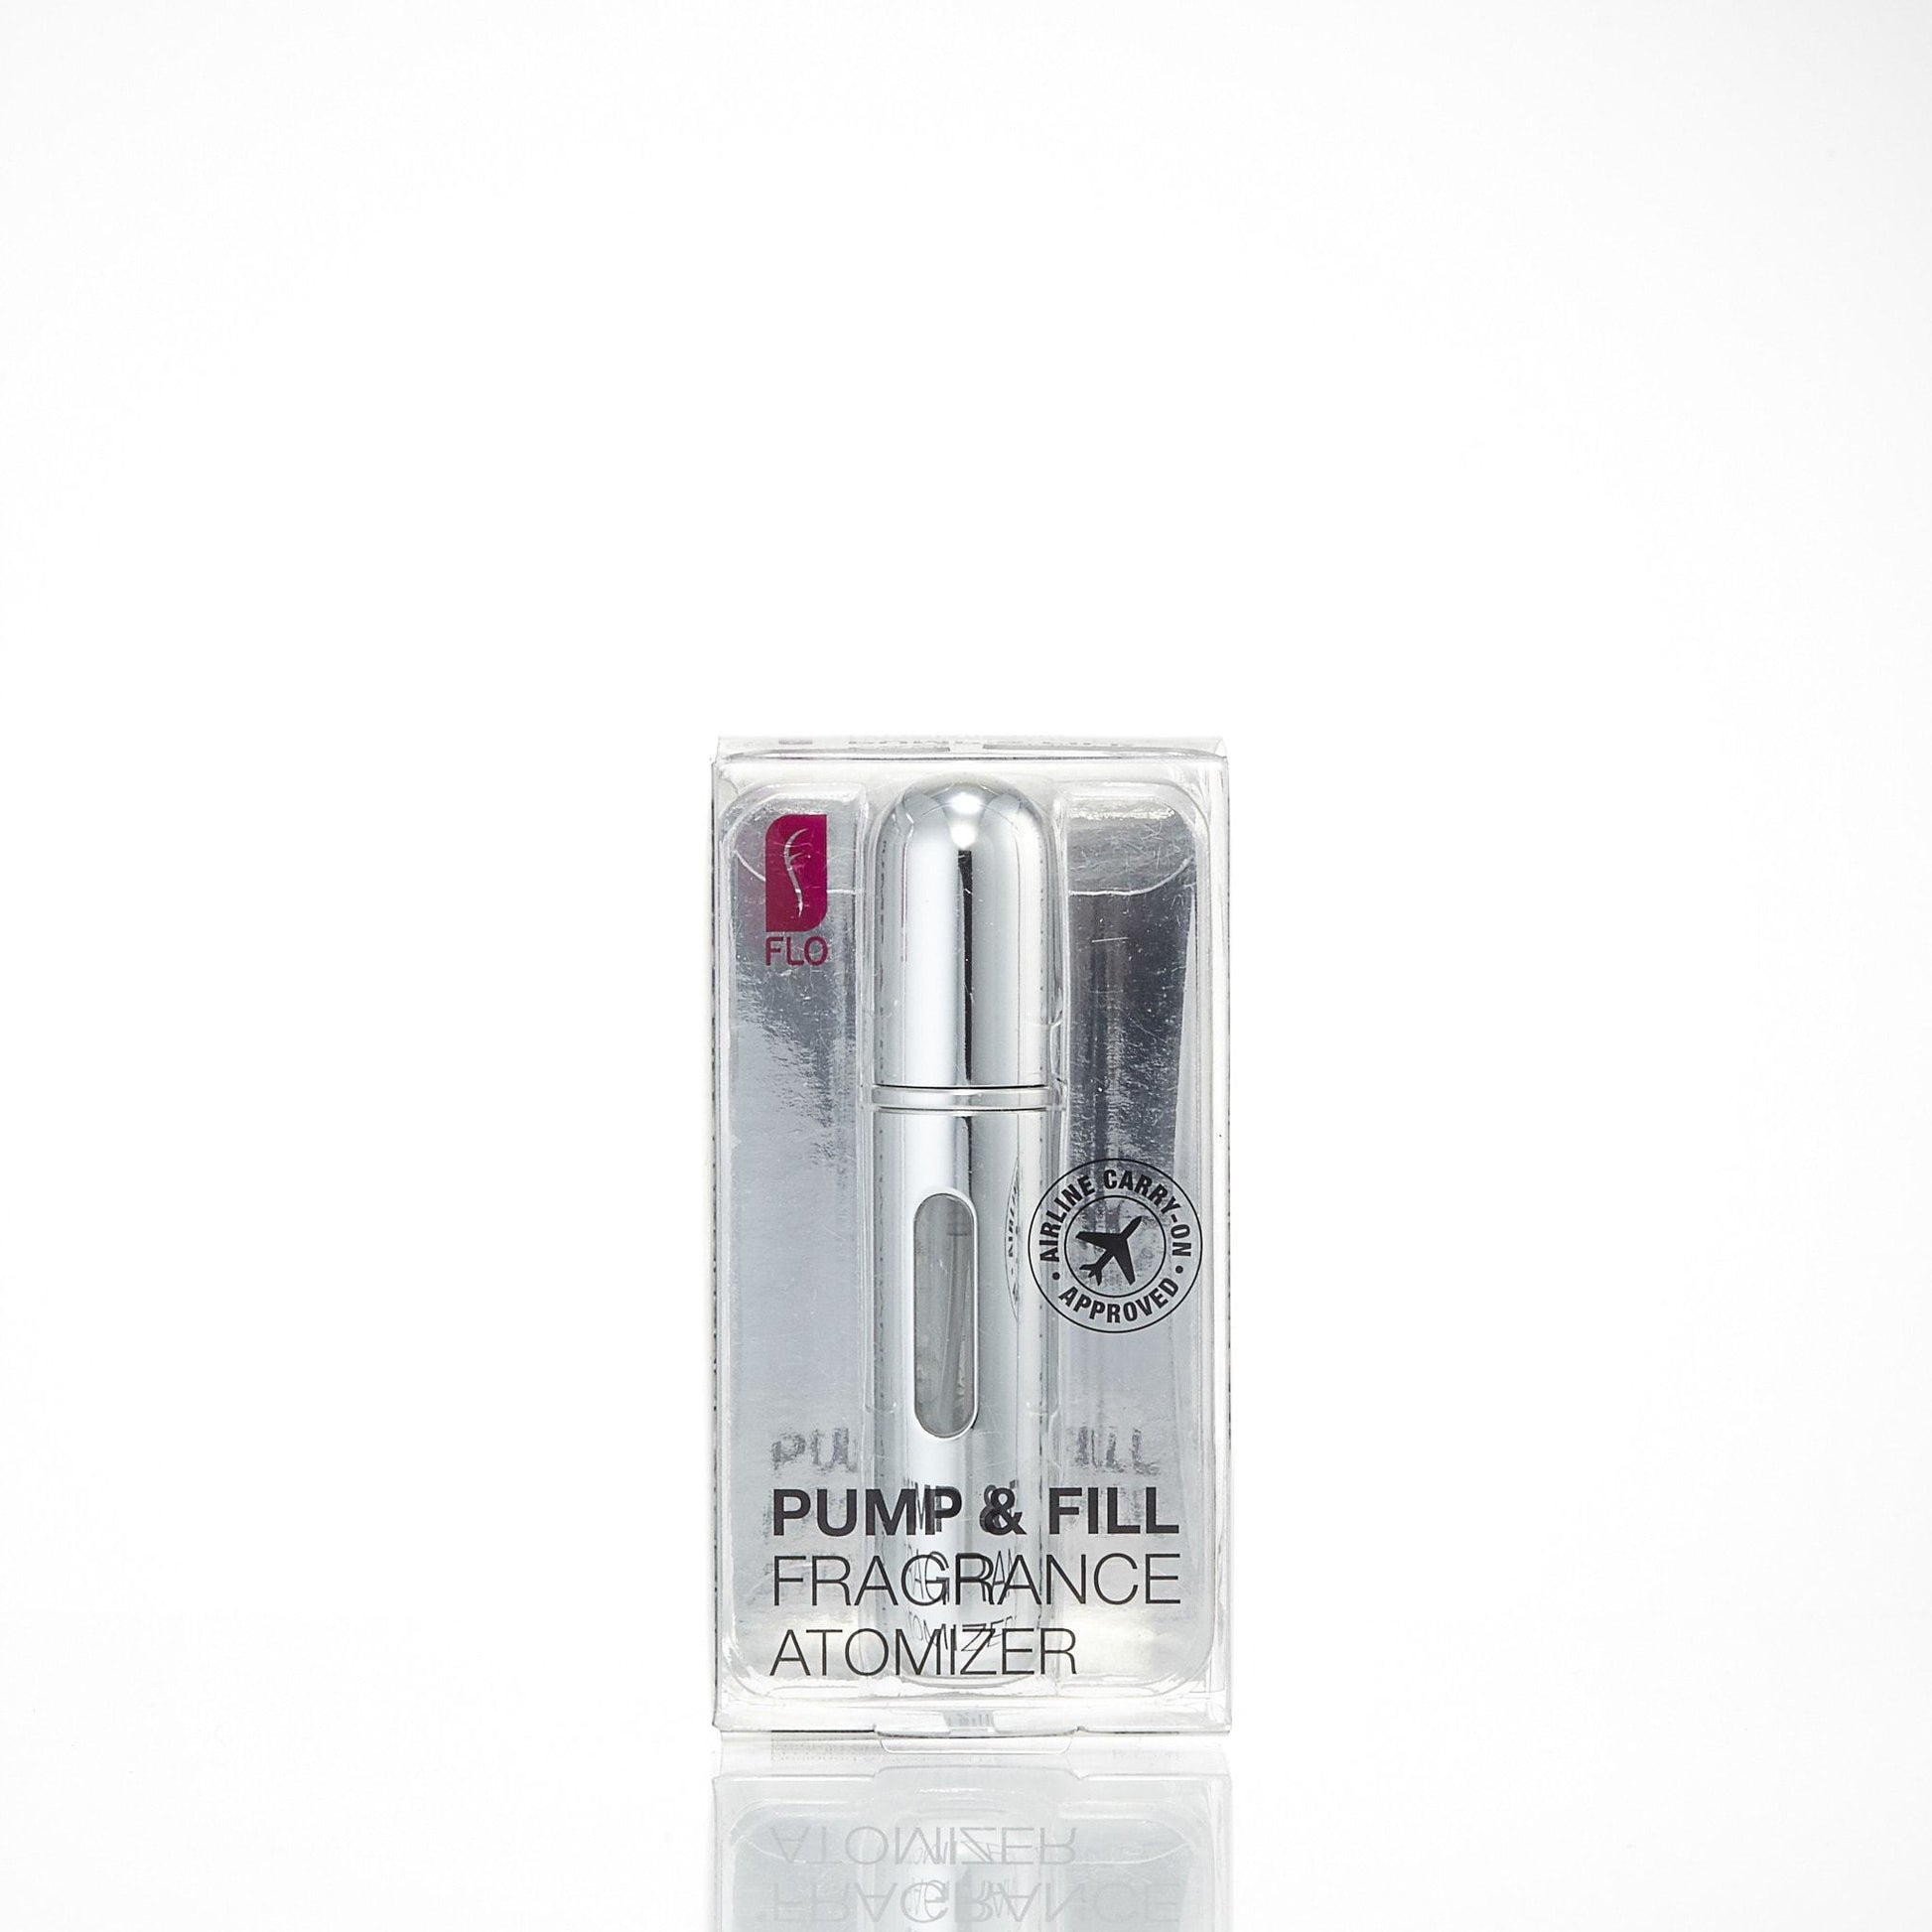 Pump and Fill Fragrance Atomizer by Flo, Product image 5